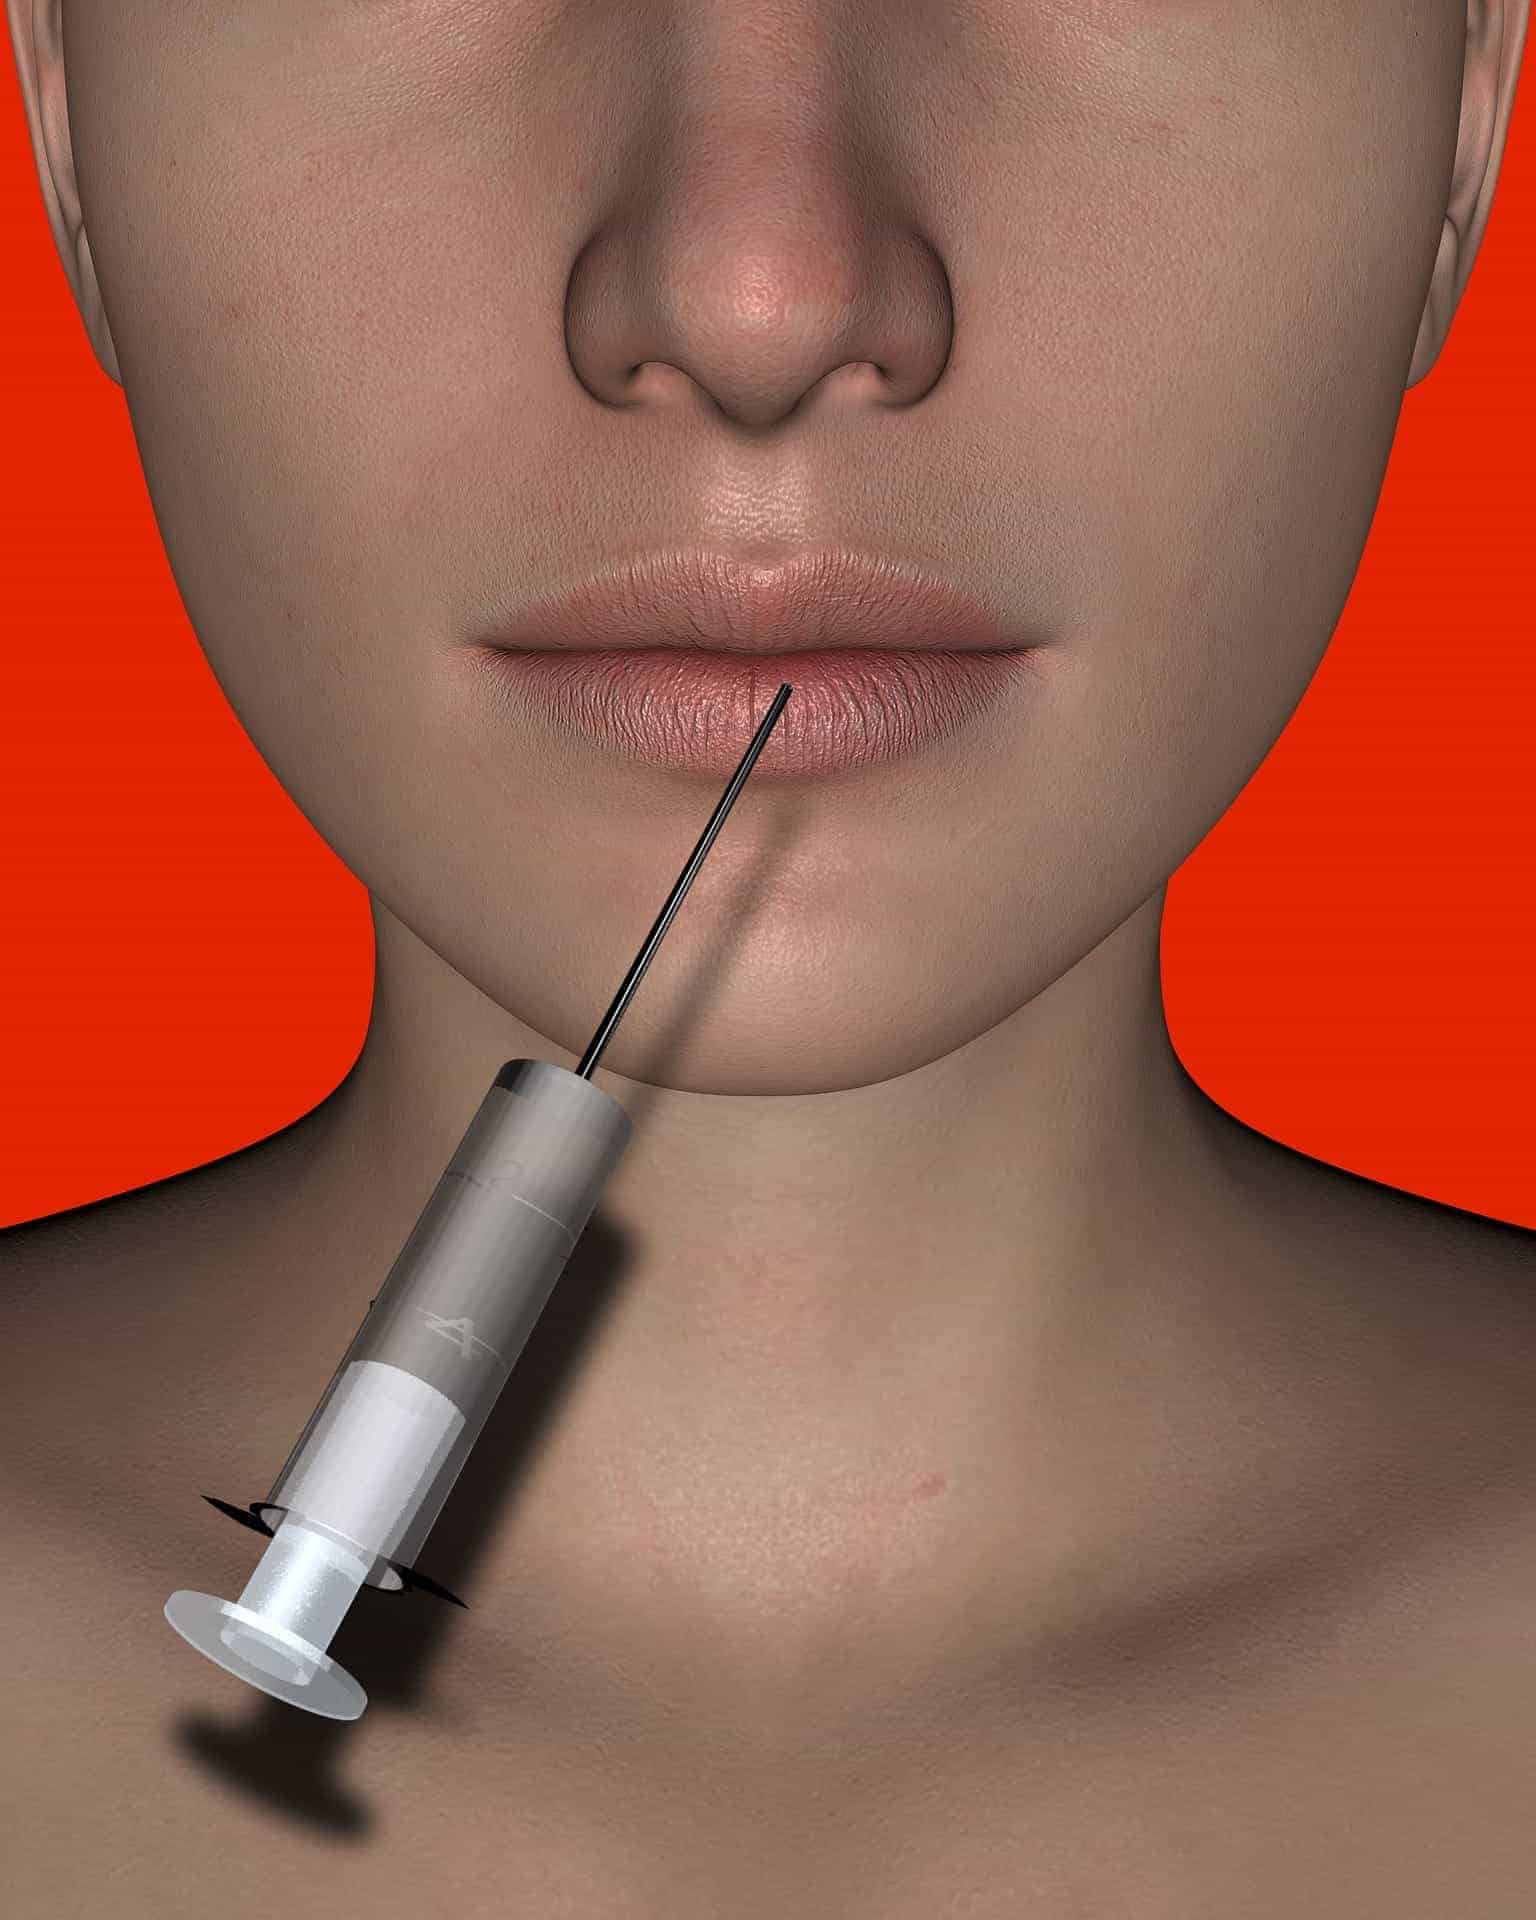 Science Explains What Happens To Your Skin When You Use Botox